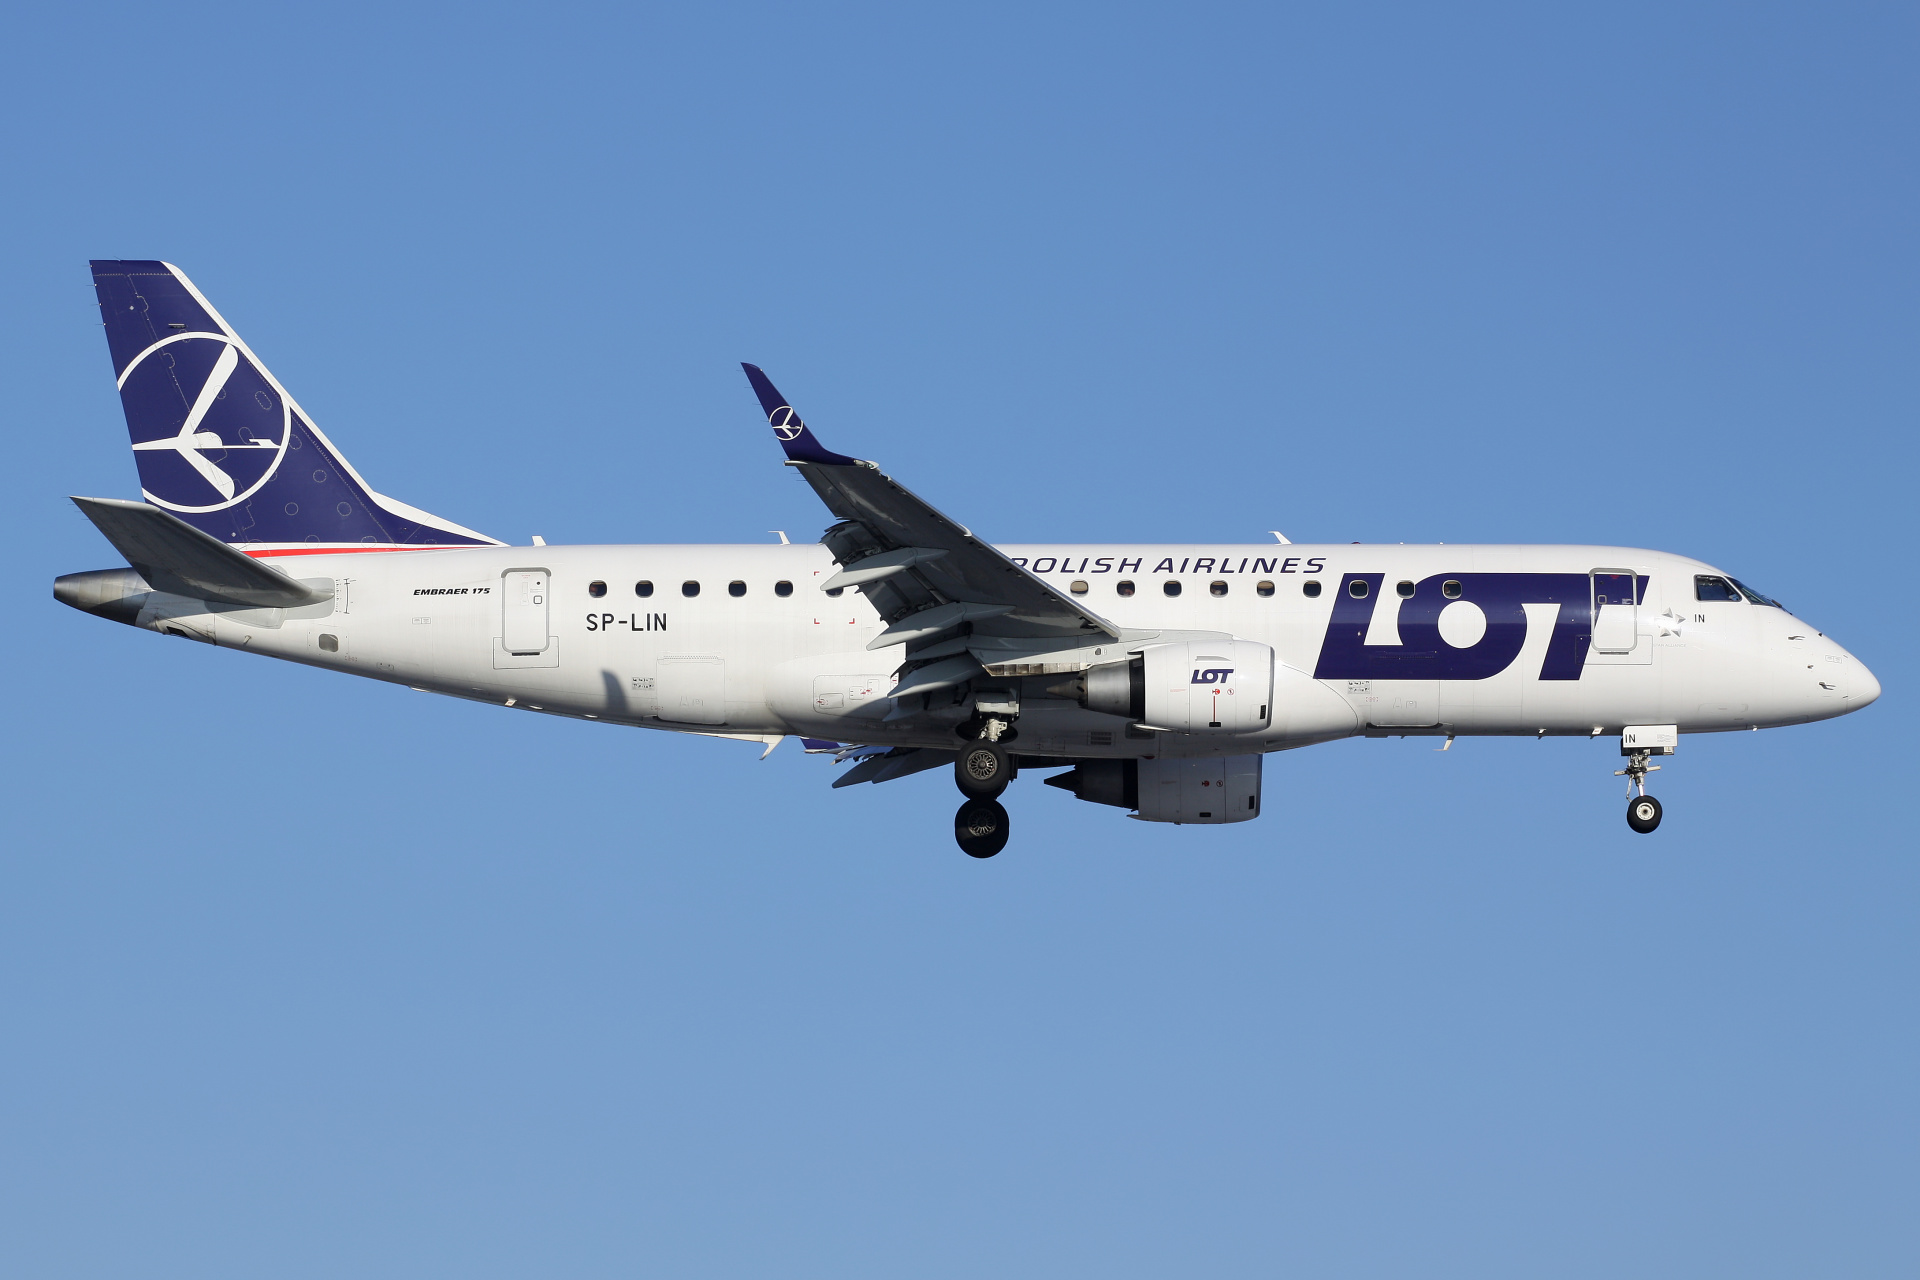 SP-LIN (new livery) (Aircraft » EPWA Spotting » Embraer E175 » LOT Polish Airlines)